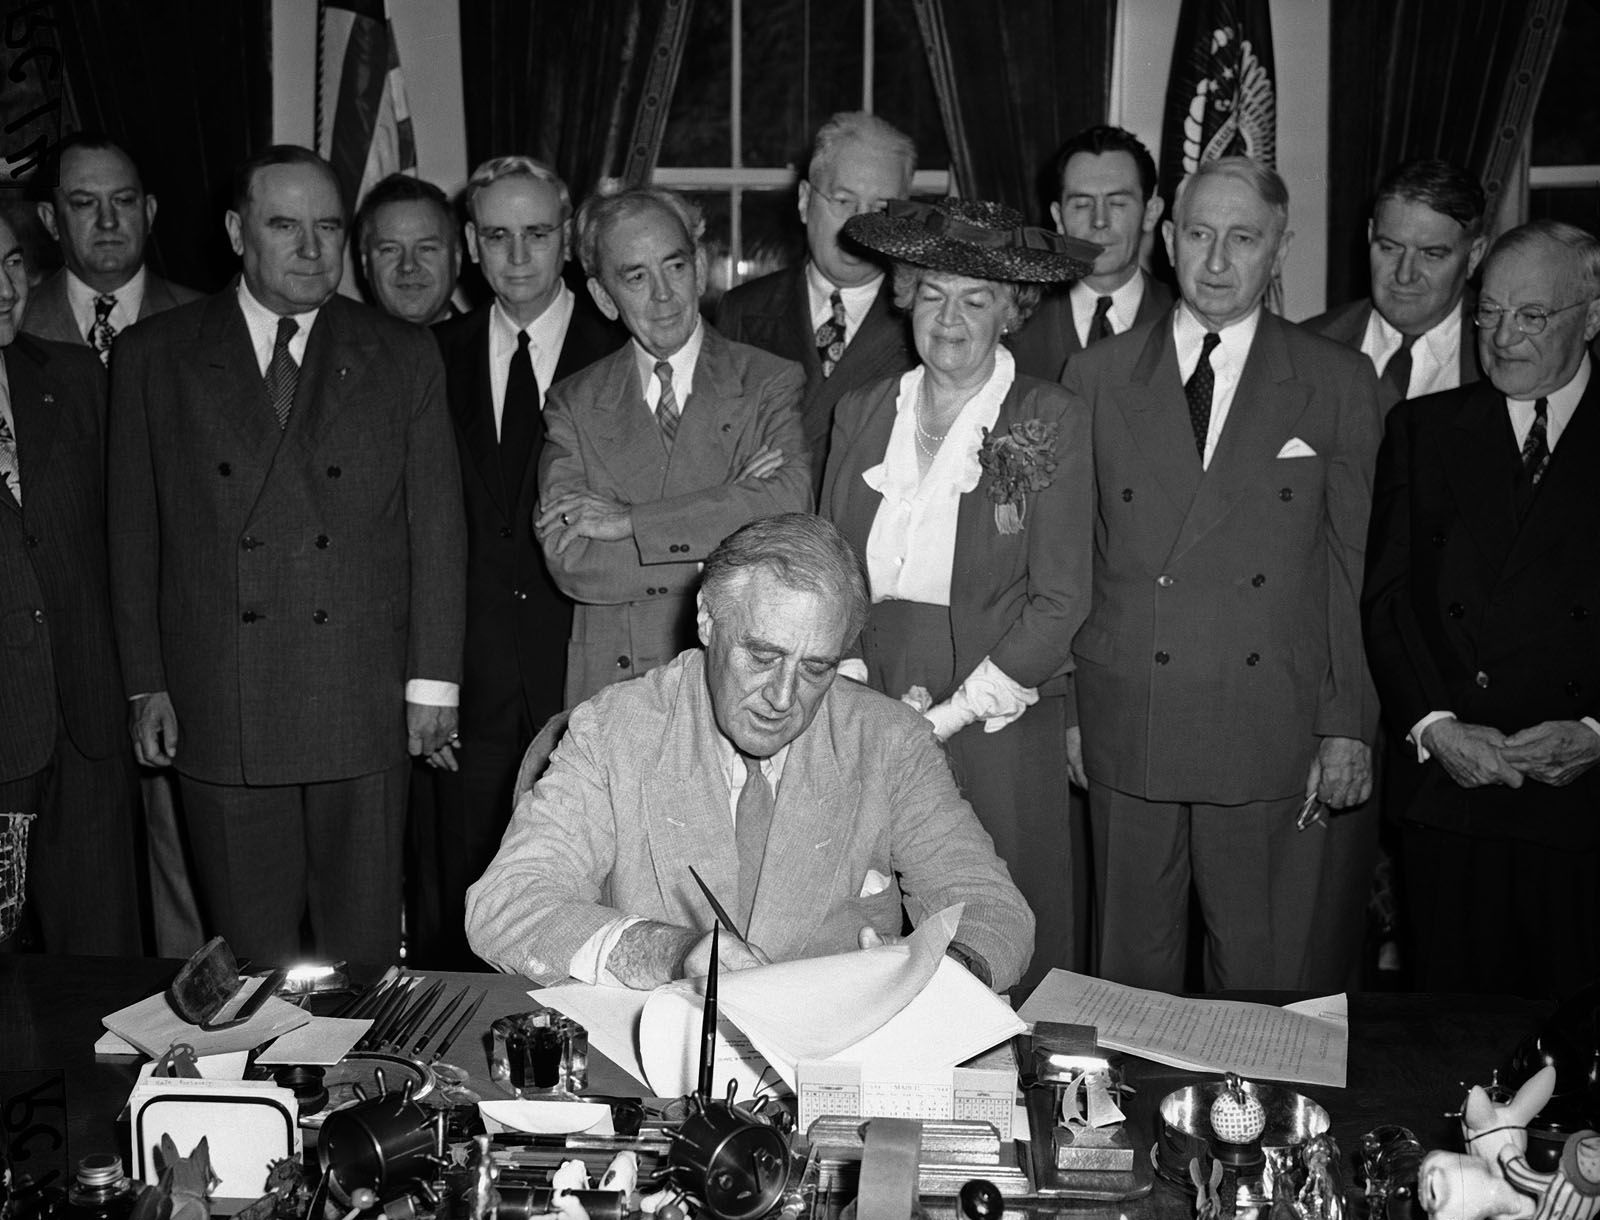 FILE - In this June 22, 1944 file photo, President Franklin D. Roosevelt puts his signature on the G.I. Bill of Rights at the White House in Washington, putting into law the measure for veterans aid.  Looking on from left are: Sen. Bennett Clark, D-Mo.; Rep. J. Harbin Peterson, D-Fla.; Rep. A. Leonard Allen, D-La.; Rep. John Rankin, D-Miss.; Rep. Paul Cunningham, R- Iowa.; Rep. Edith Nourse Rogers, R-Mass.; J.M. Sullivan; Sen. Walter George, D-Ga.; John Steele; and Sen. Robert Wagner, D-N.Y. Sullivan and Steele are American Legion officials who helped sponsor the bill.  (AP Photo/File)